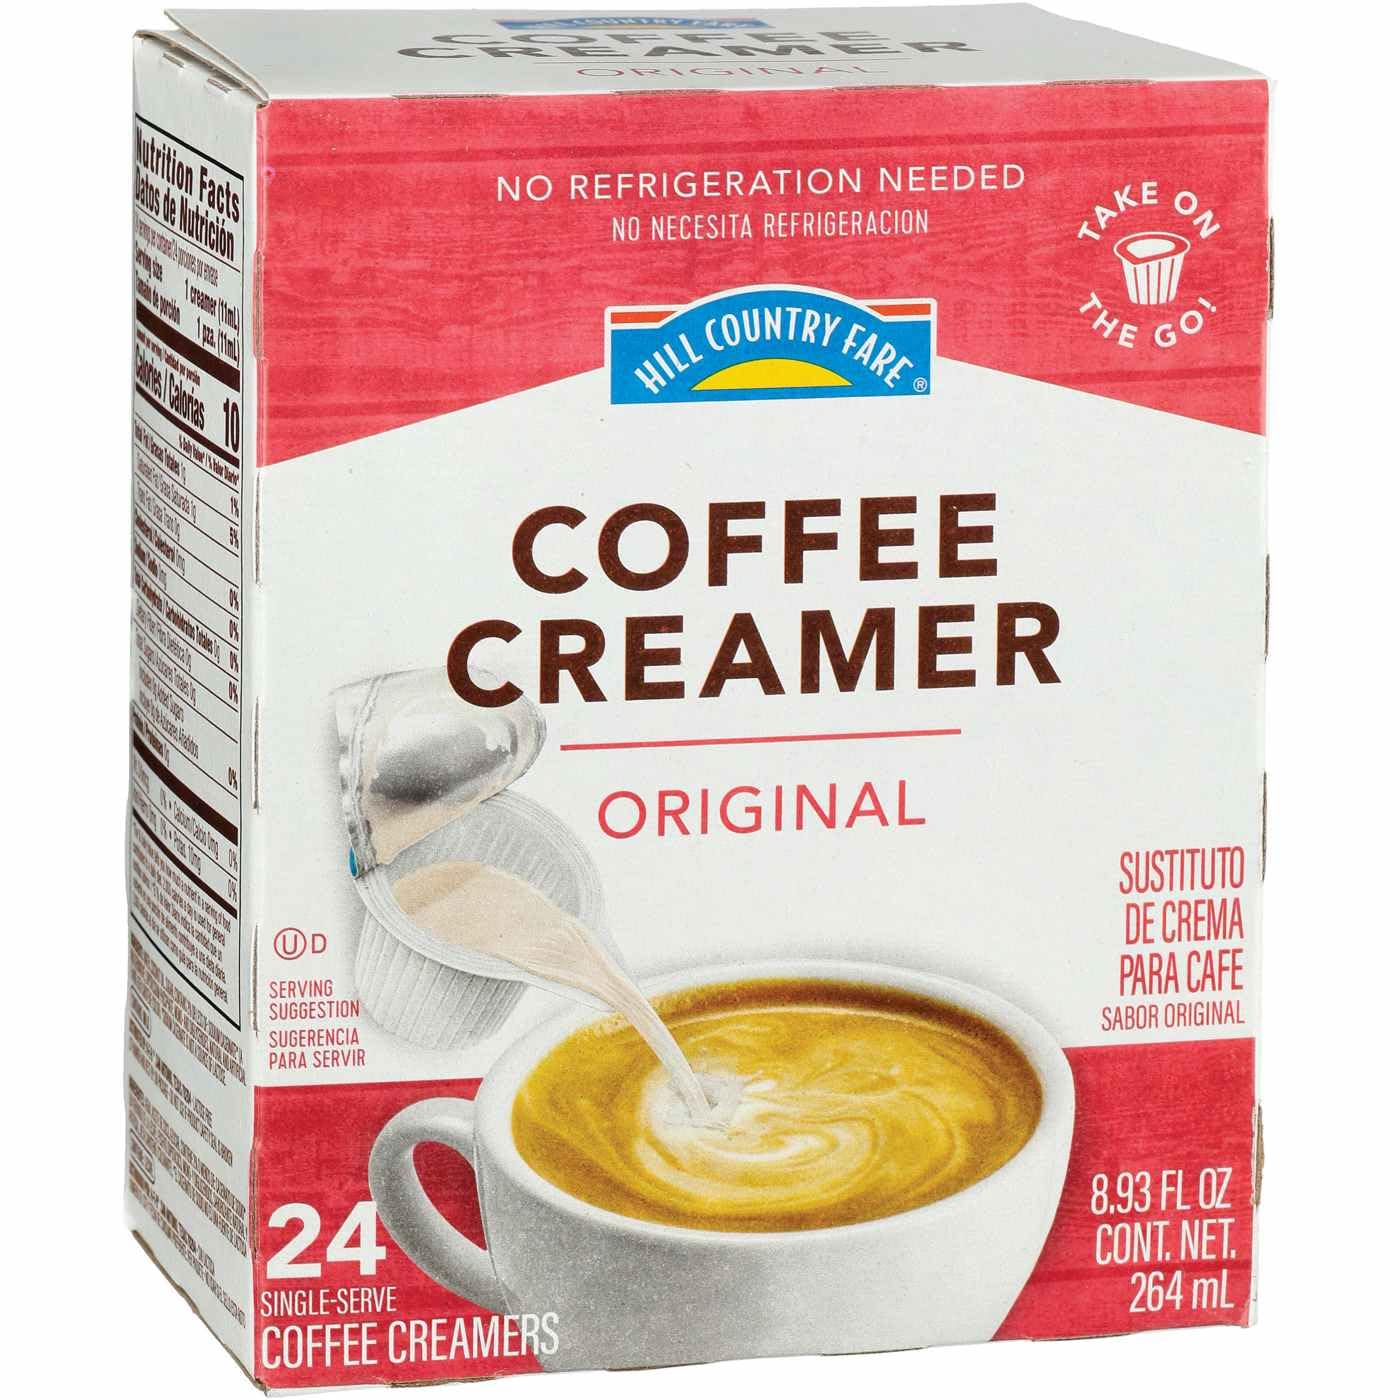 HEB Hill Country Fare Coffee Creamer Single Serve Cups, 24 Count - Easy Peel-Back Lid, No Refrigeration Needed, Rich Creaminess (Original)